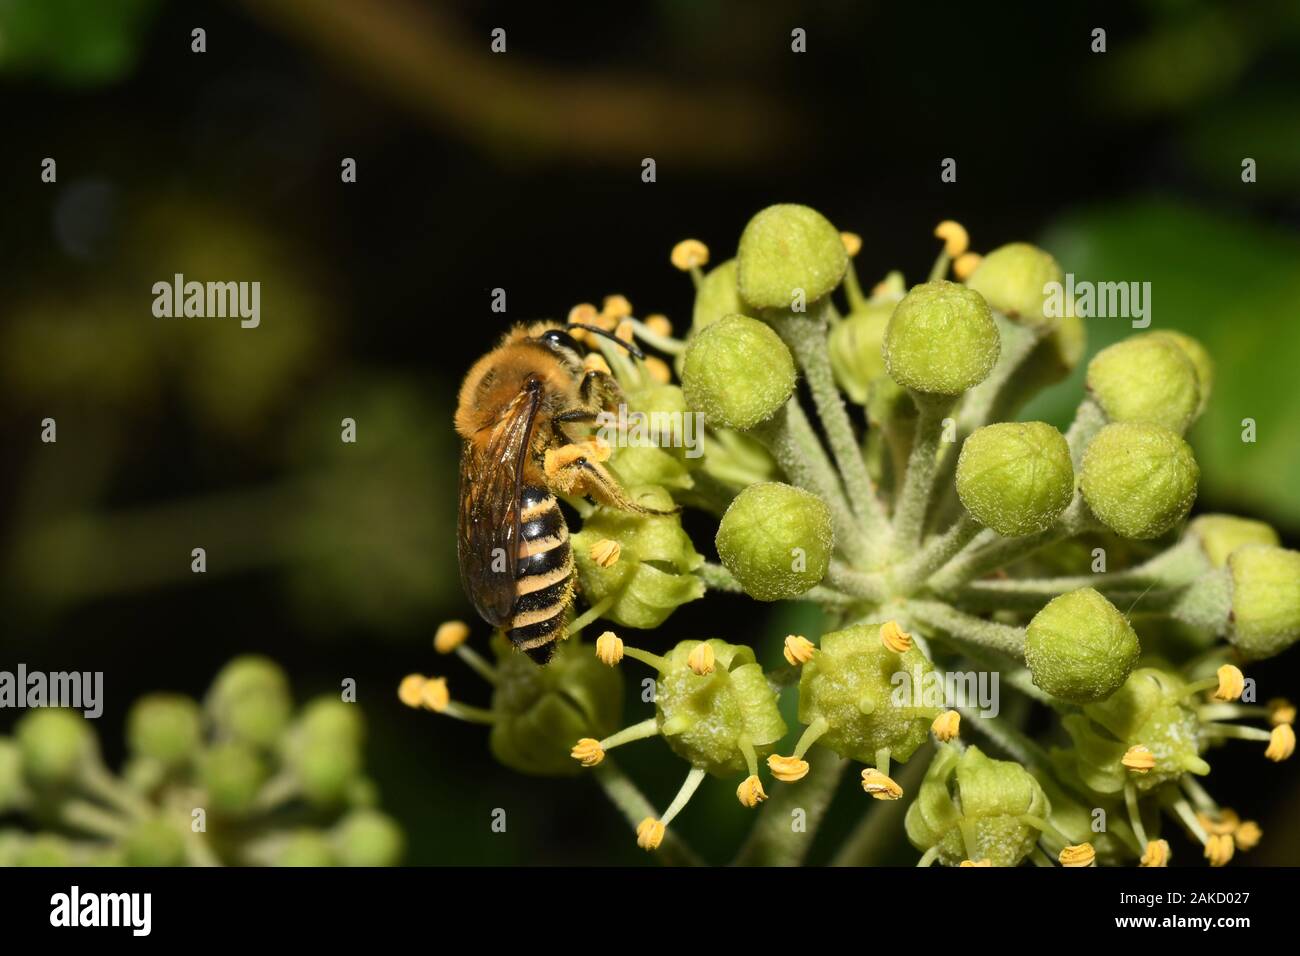 The Ivy Bee,Colletes hederae, is a species of mining bee first recorded in Britain in 2001. It forages almost exclusively at flowers of Ivy, and flies Stock Photo